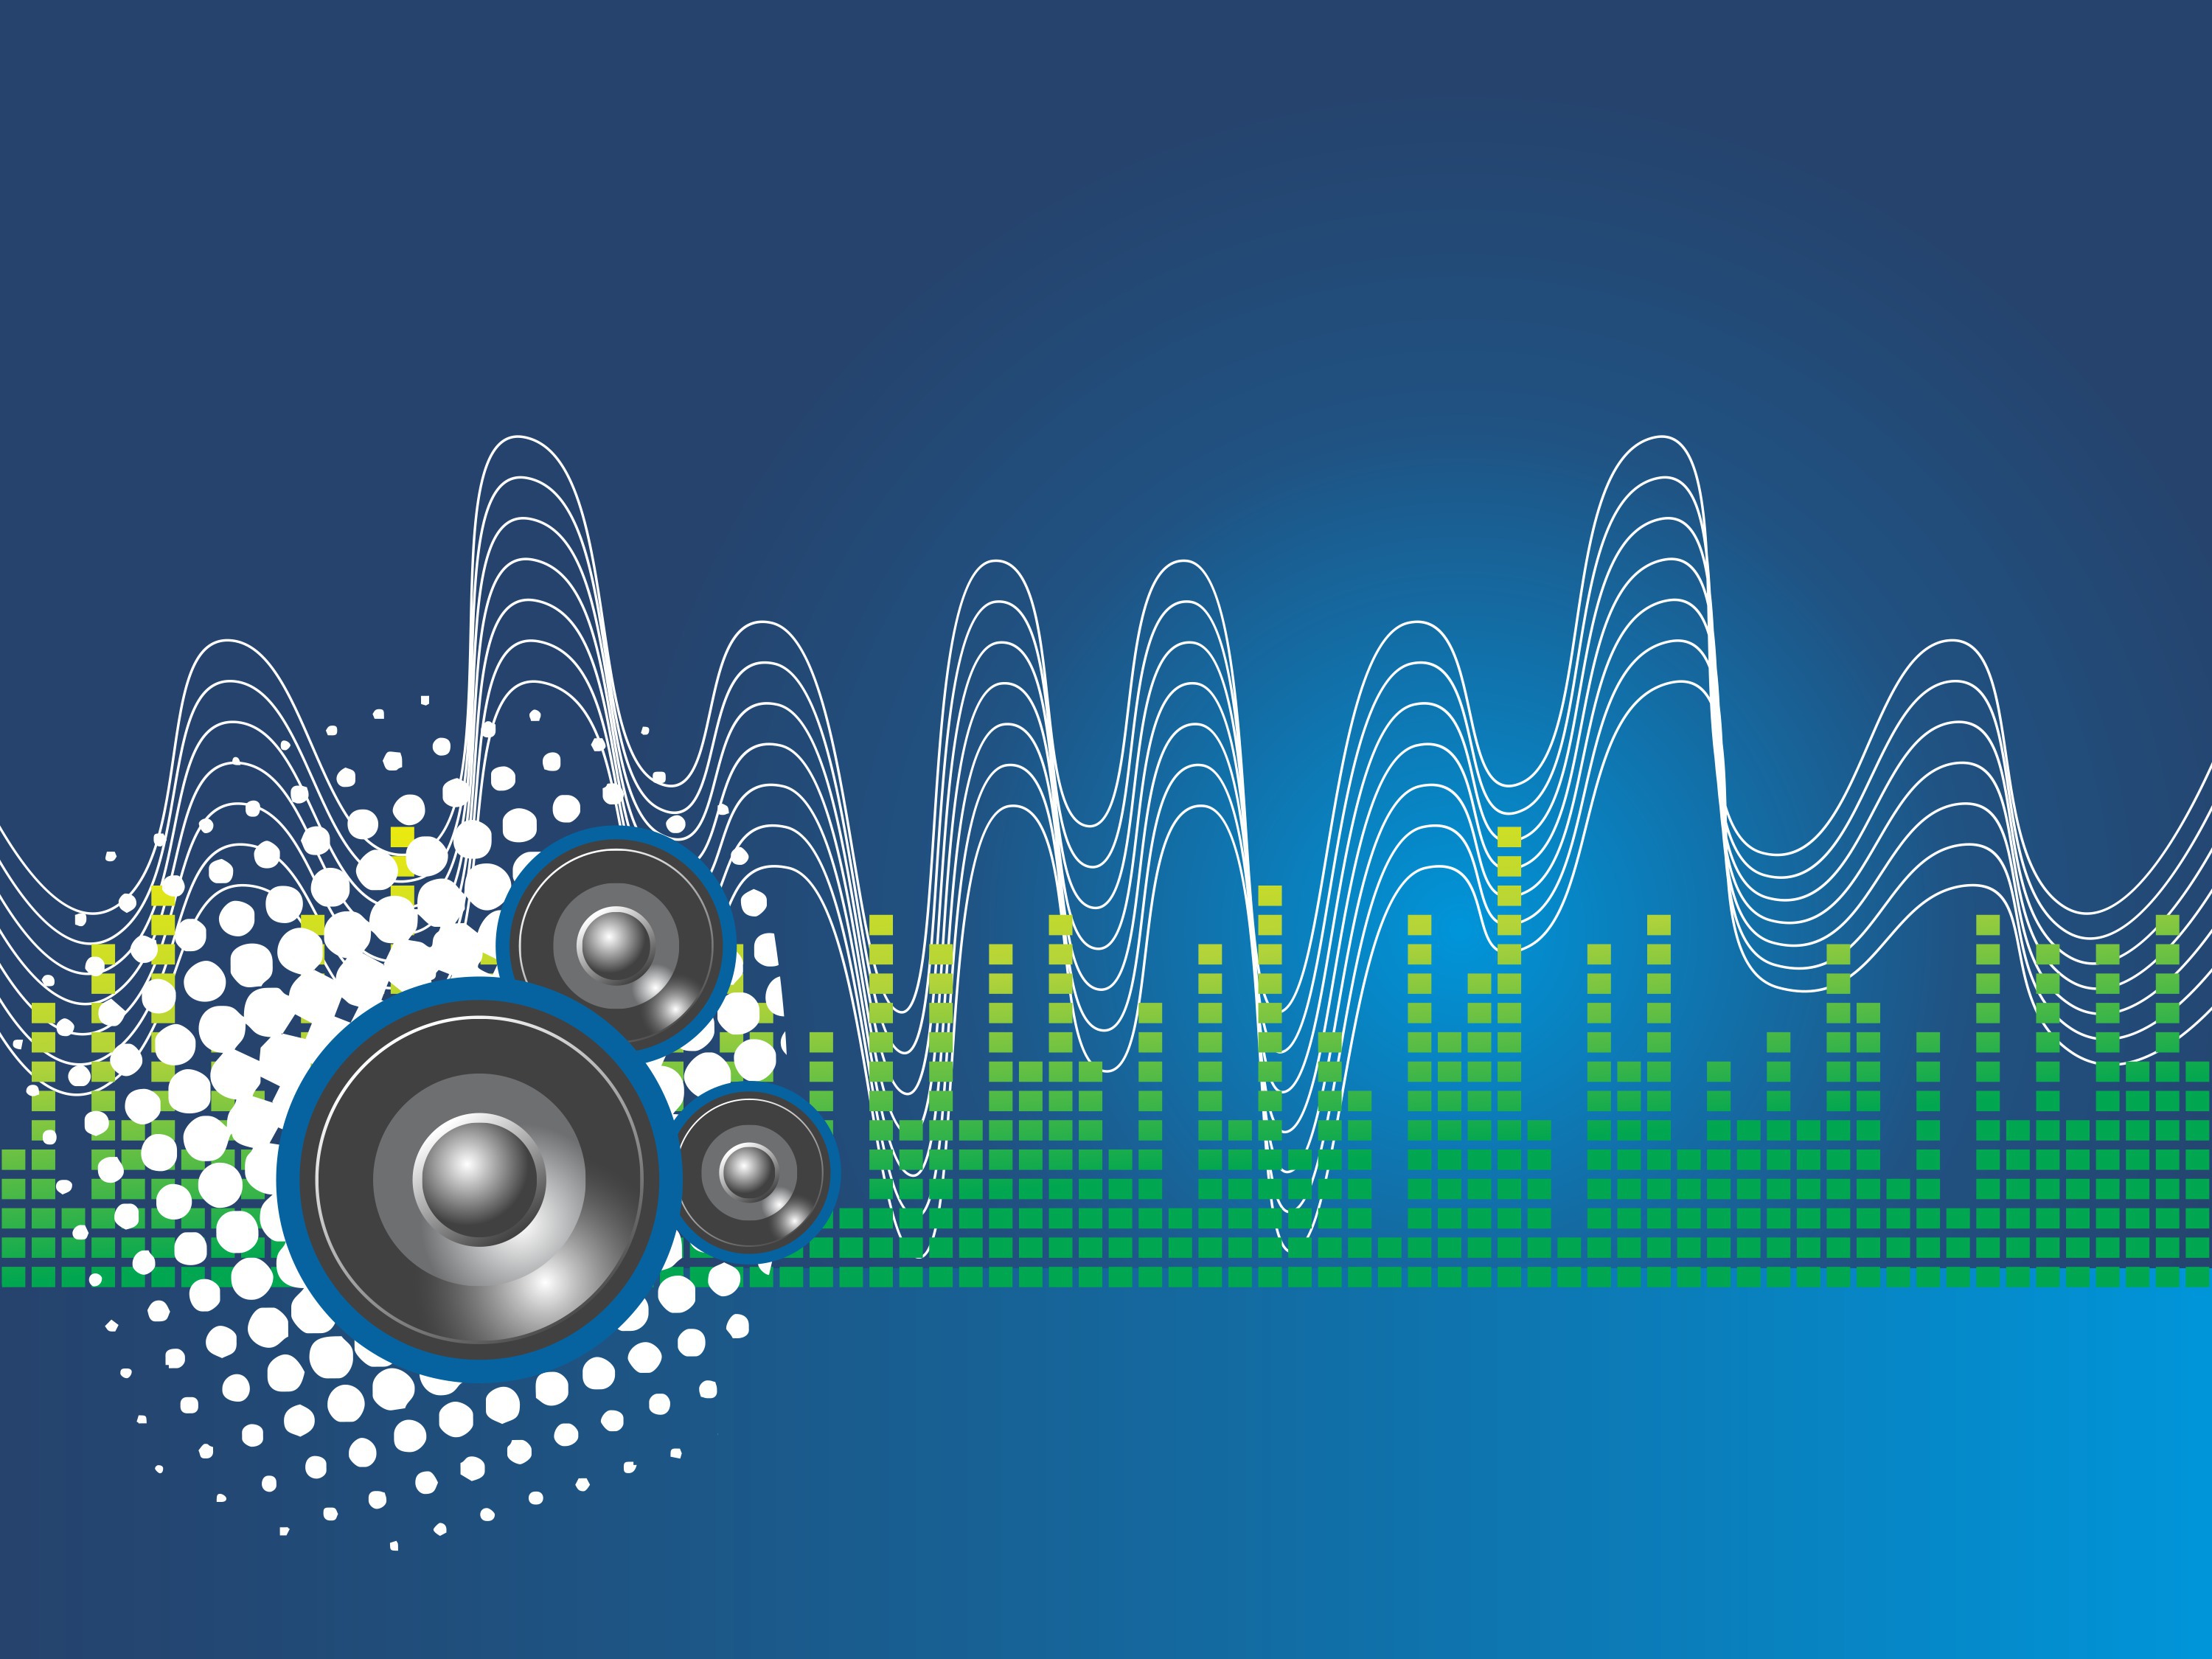 Cover image for  article: Best of 2019: Alli on Audio Talks Smart Speaker Growth, Digital Audio, and Reaching Key Audiences